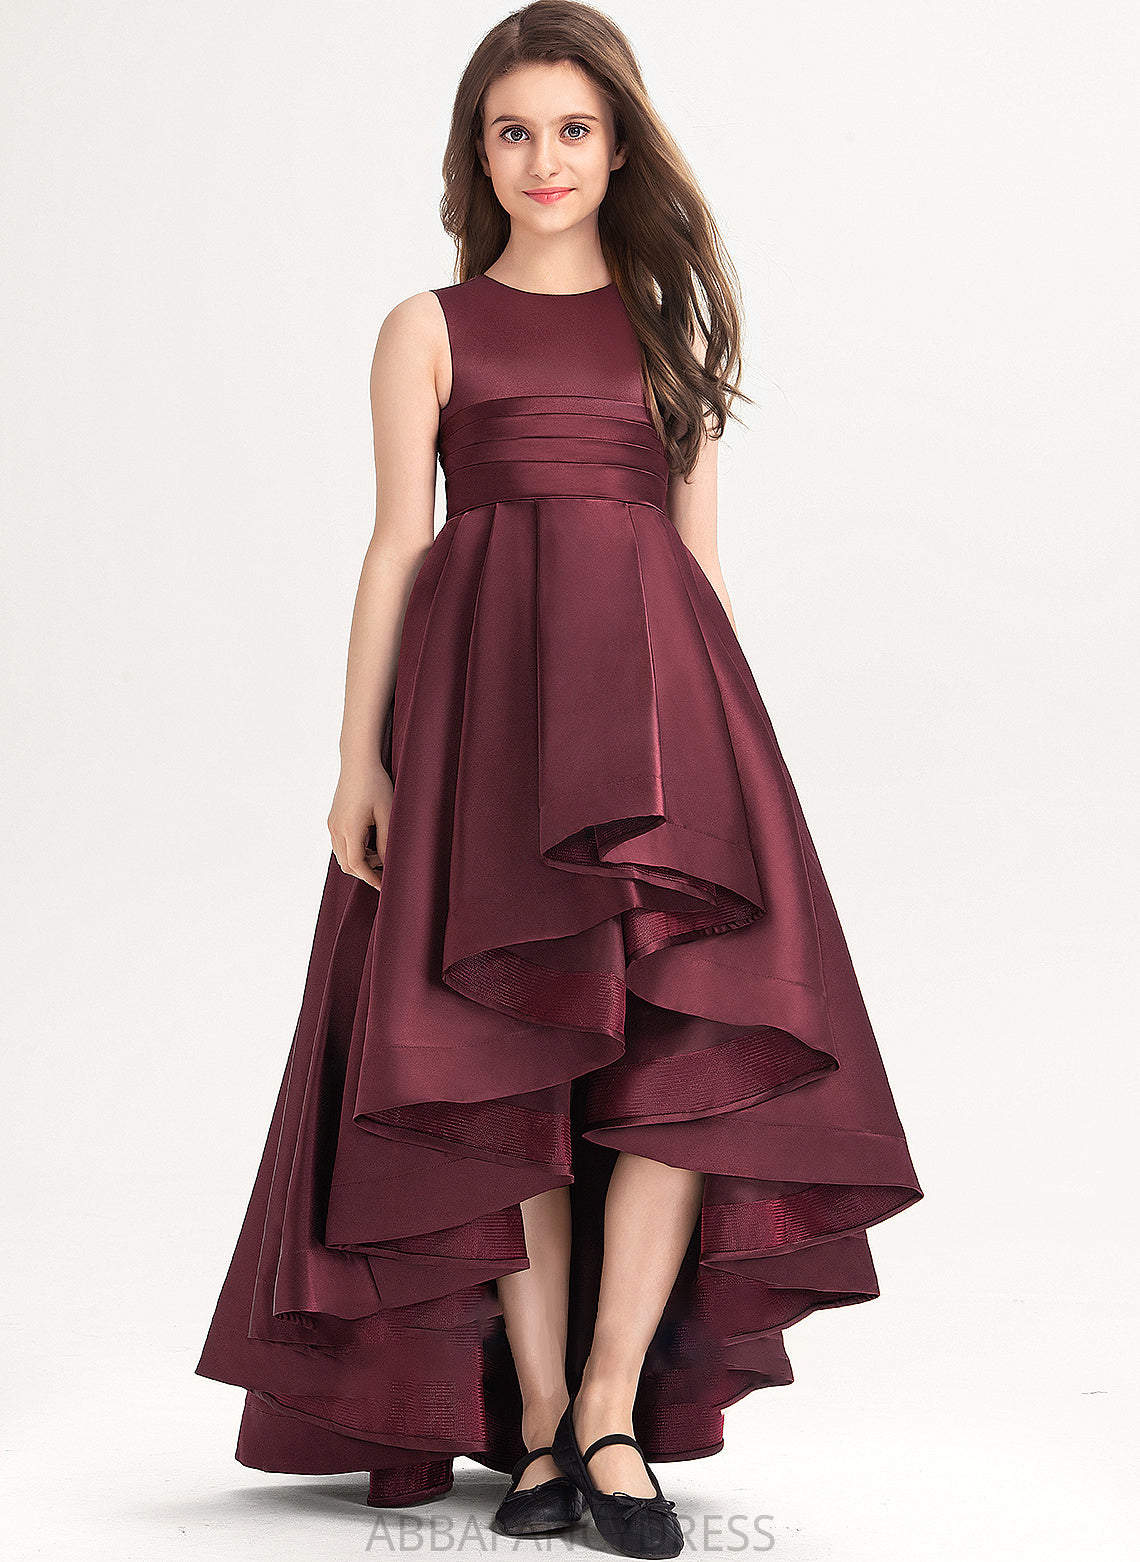 Asymmetrical Satin Junior Bridesmaid Dresses Neck Scoop Ruffle Ruth With A-Line